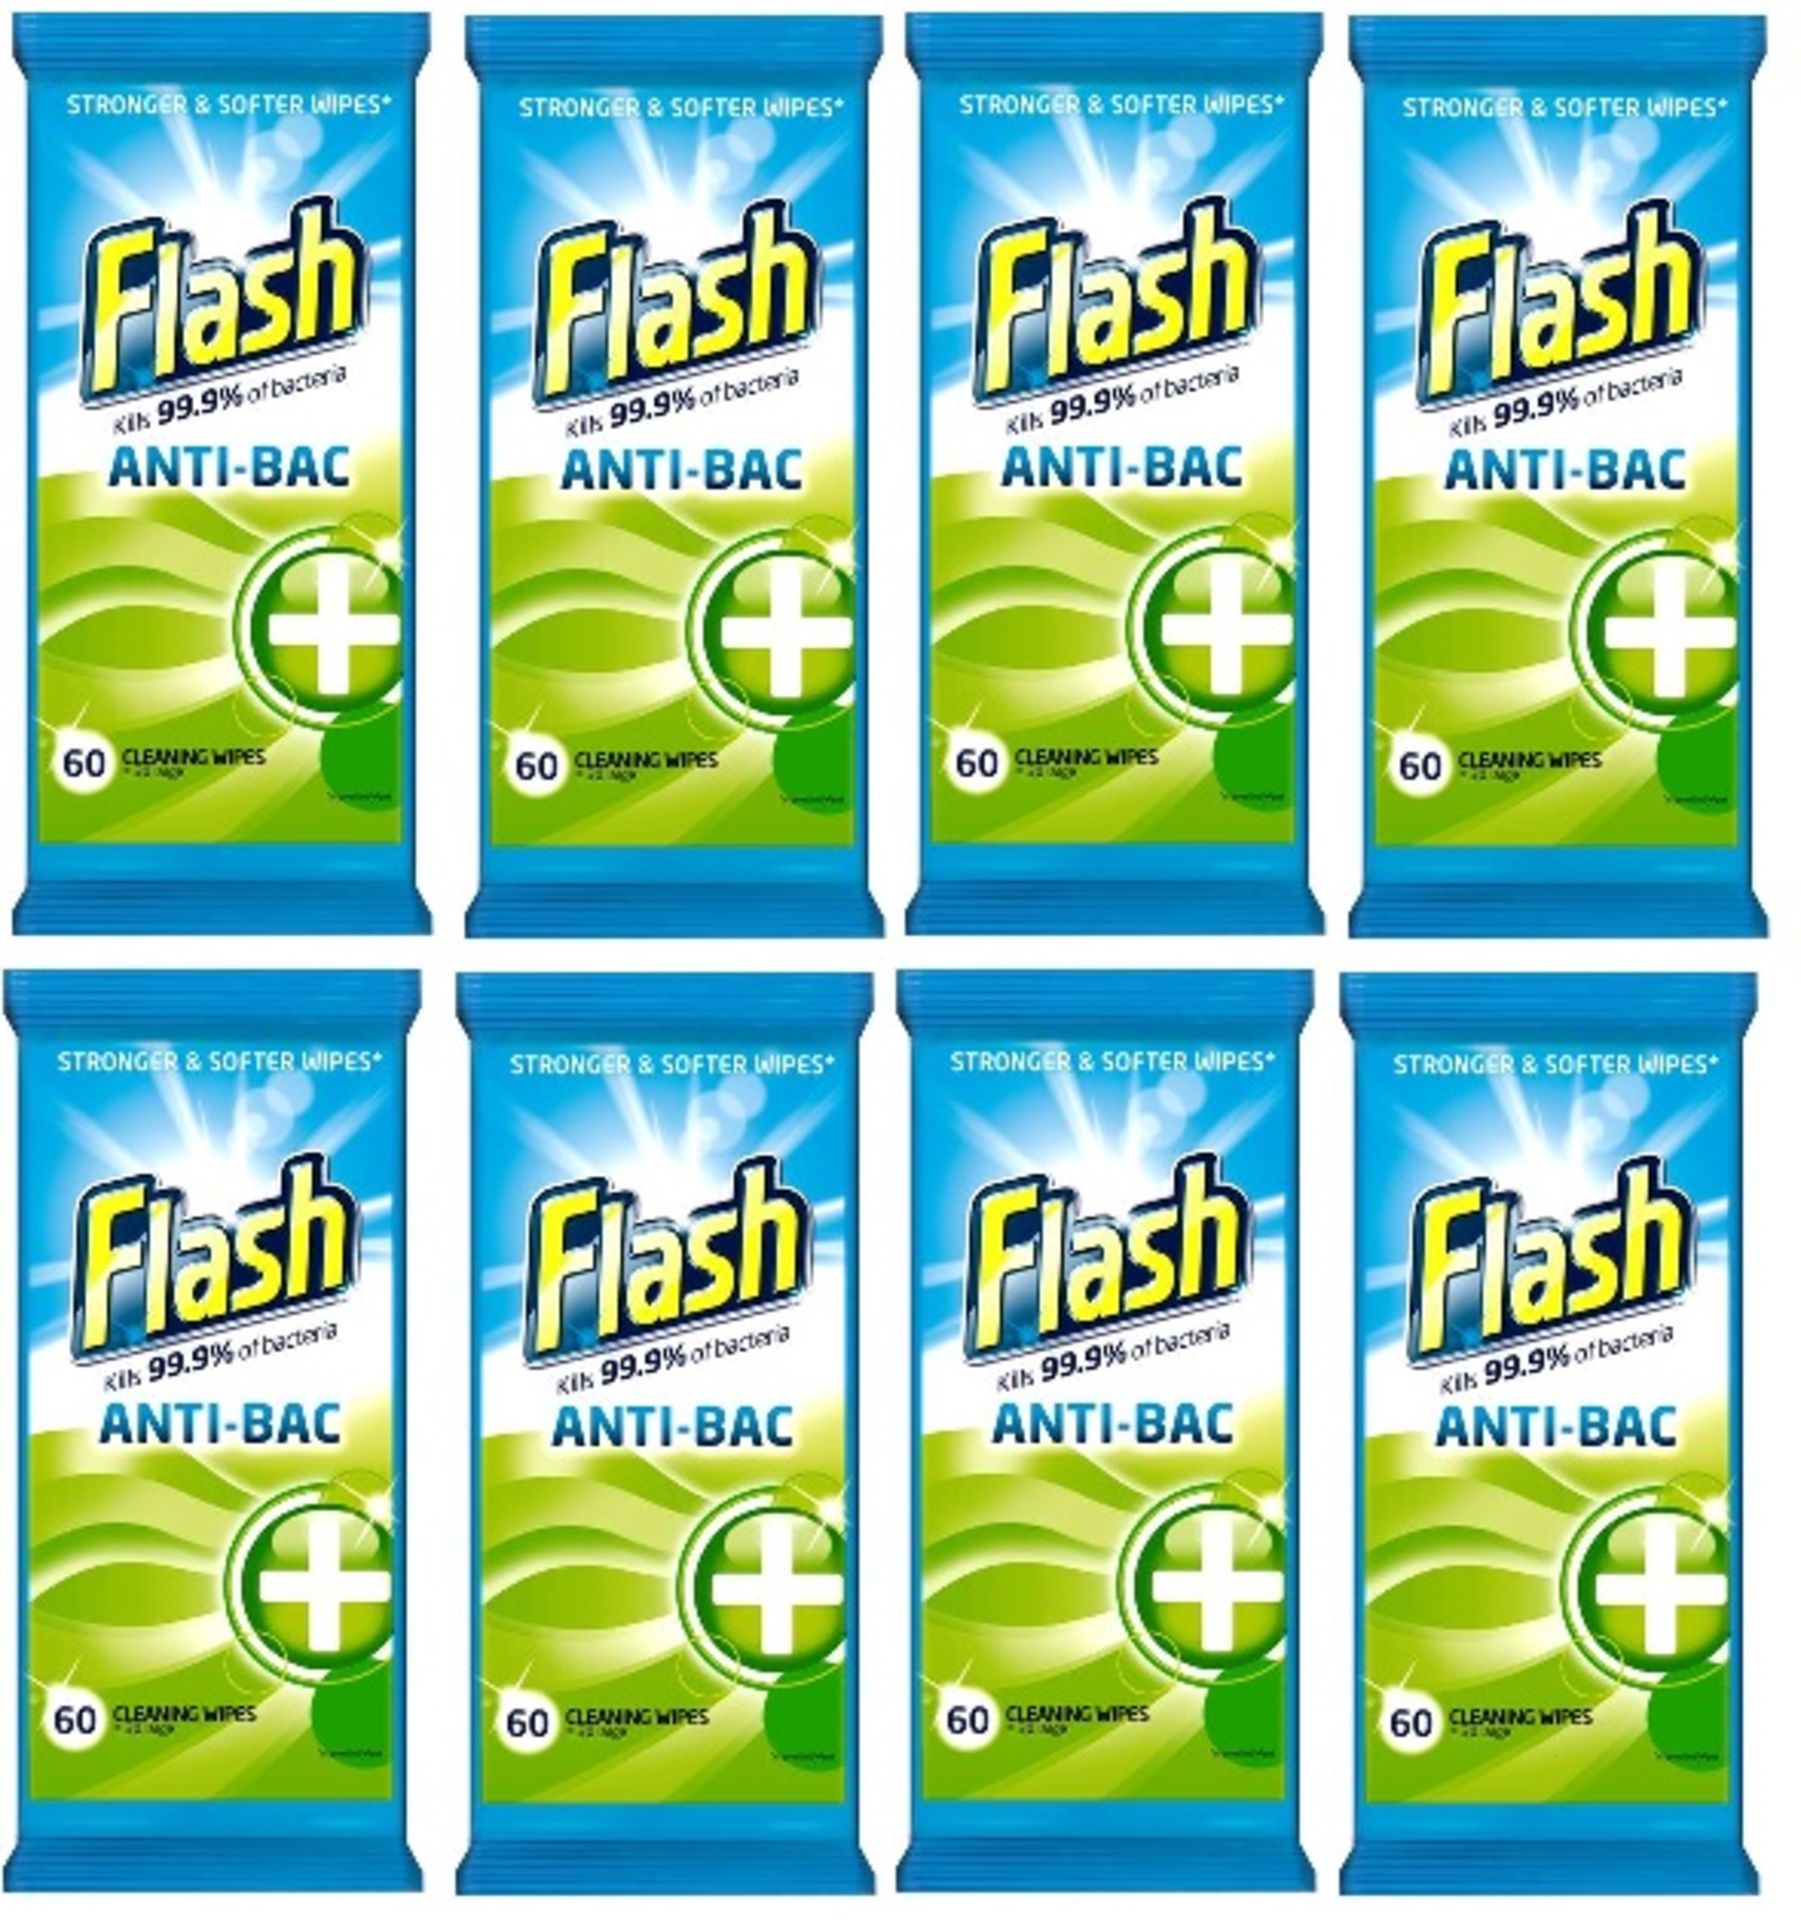 V Brand New Pack Of 8 Flash Anti-Bac Plus Wipes (x60 wipes) Sainsbury Price £16.00 Total X 2 YOUR - Image 2 of 2